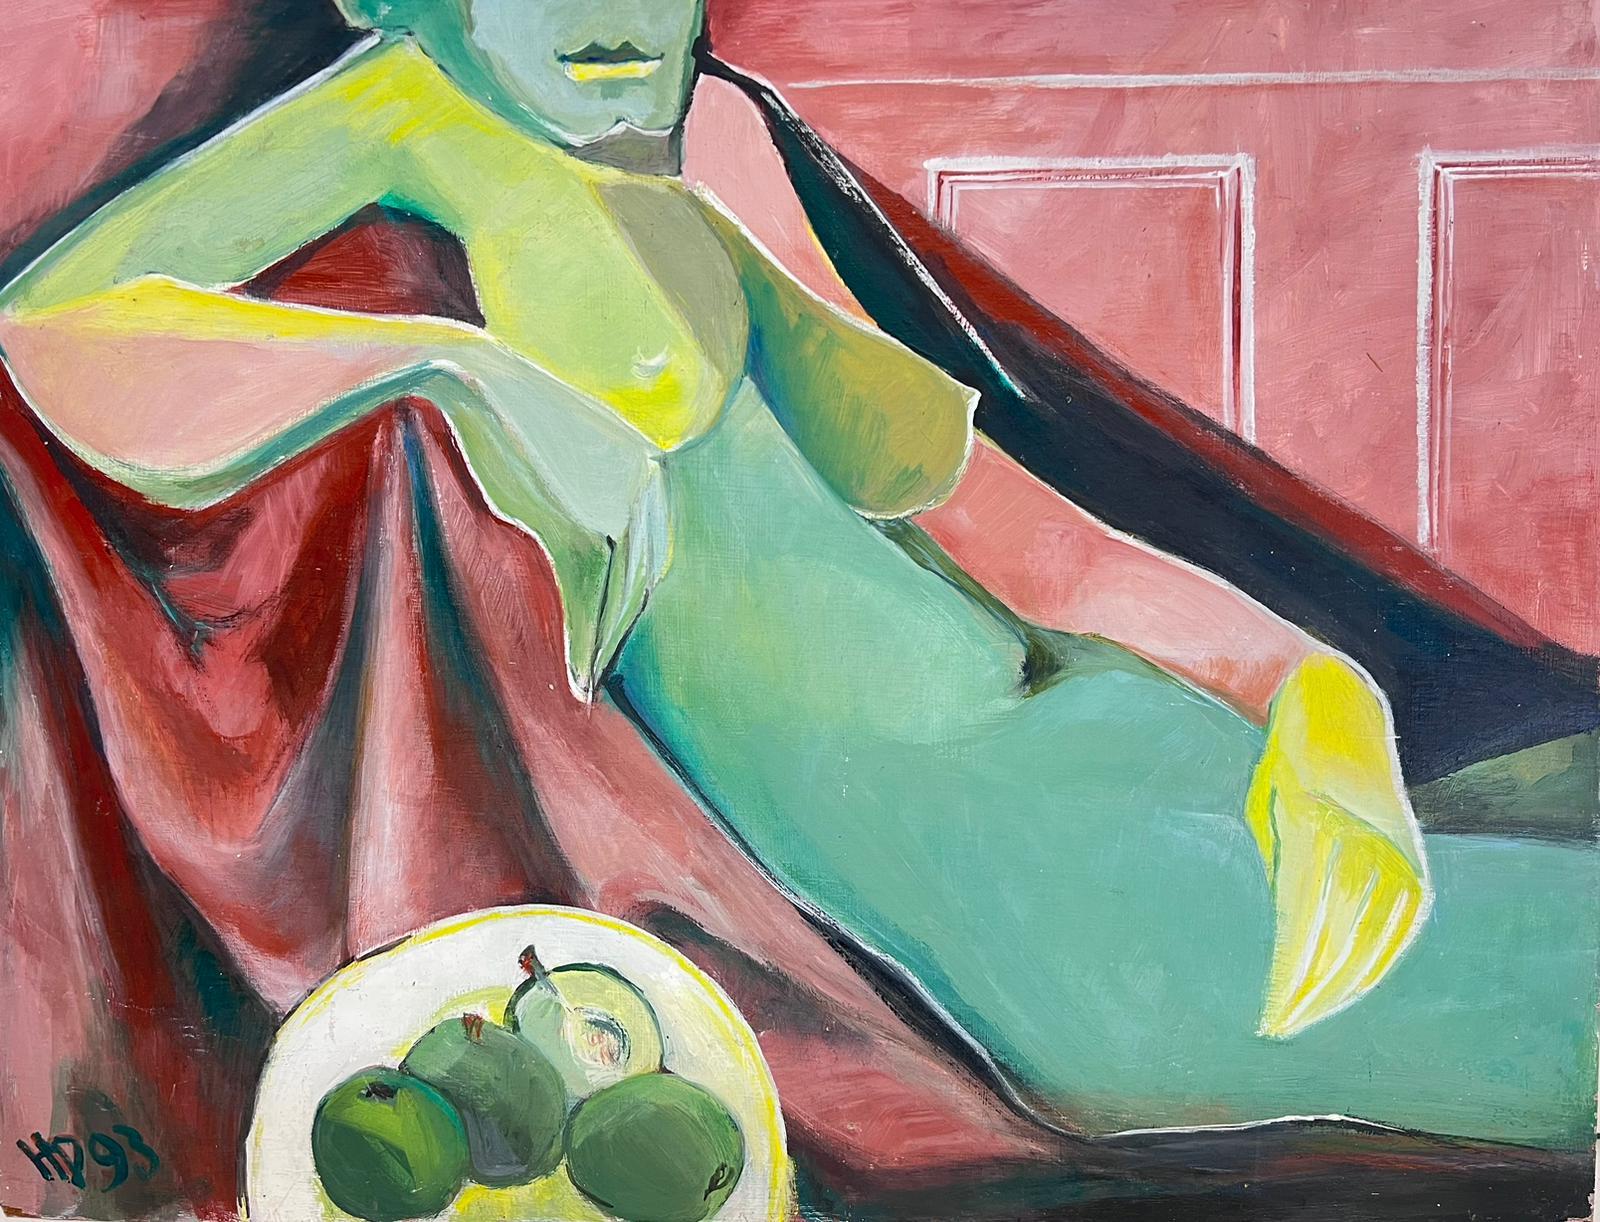 Helene Dadone Nude Painting - French Cubist 20th Century Oil Painting Nude Lady with Green Apples signed